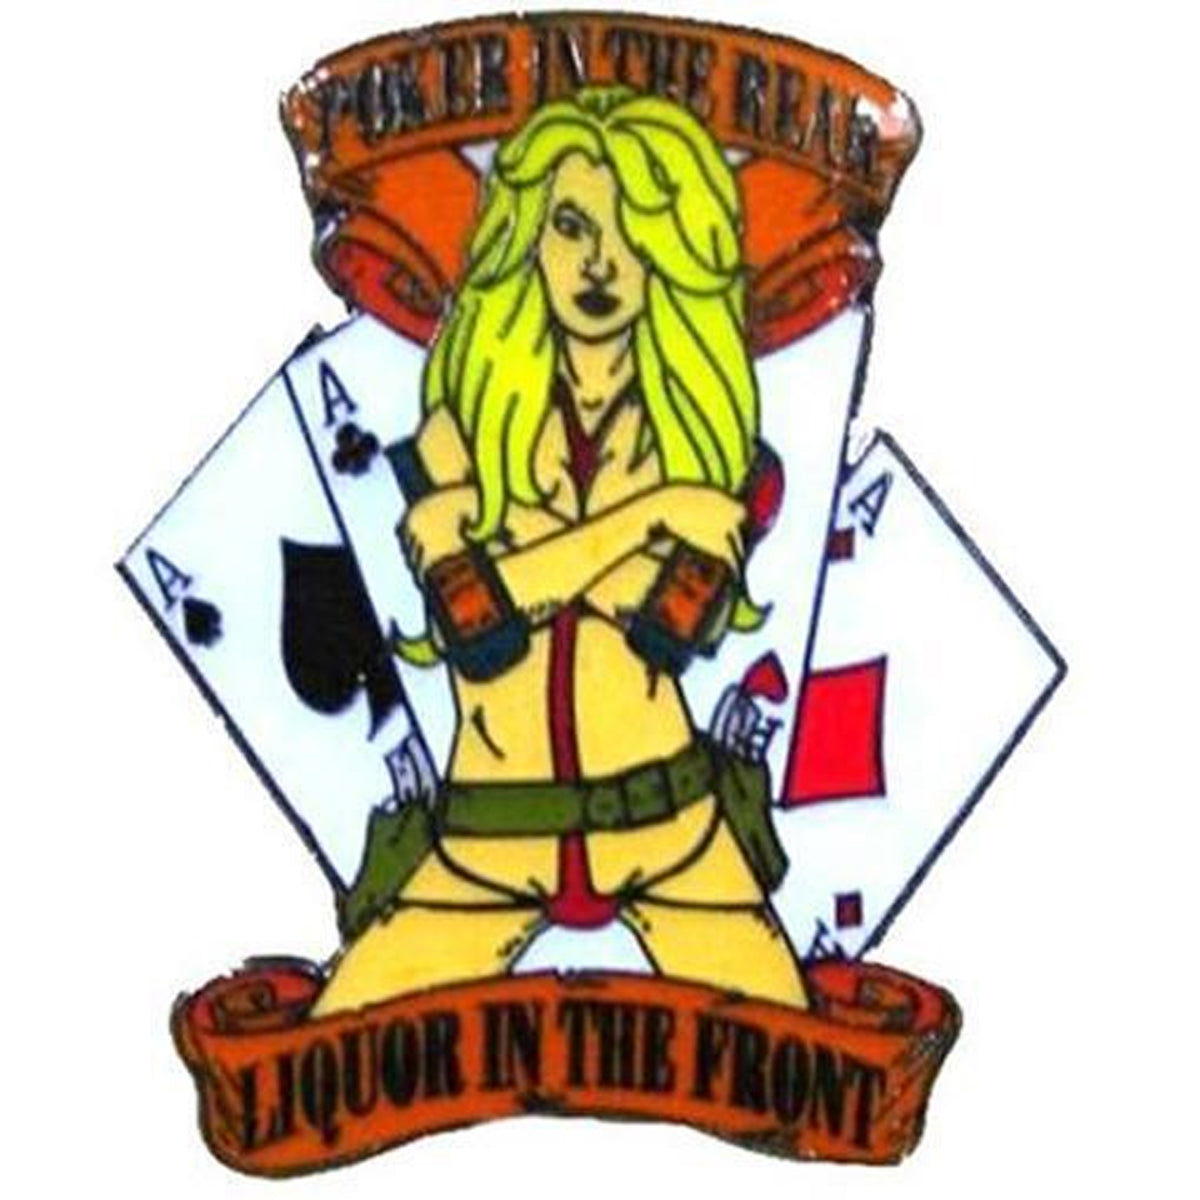 Wholesale Sexy Girl with Liquor Bottles Poker in the Front Hat / Jacket Pin (Sold by the dozen)